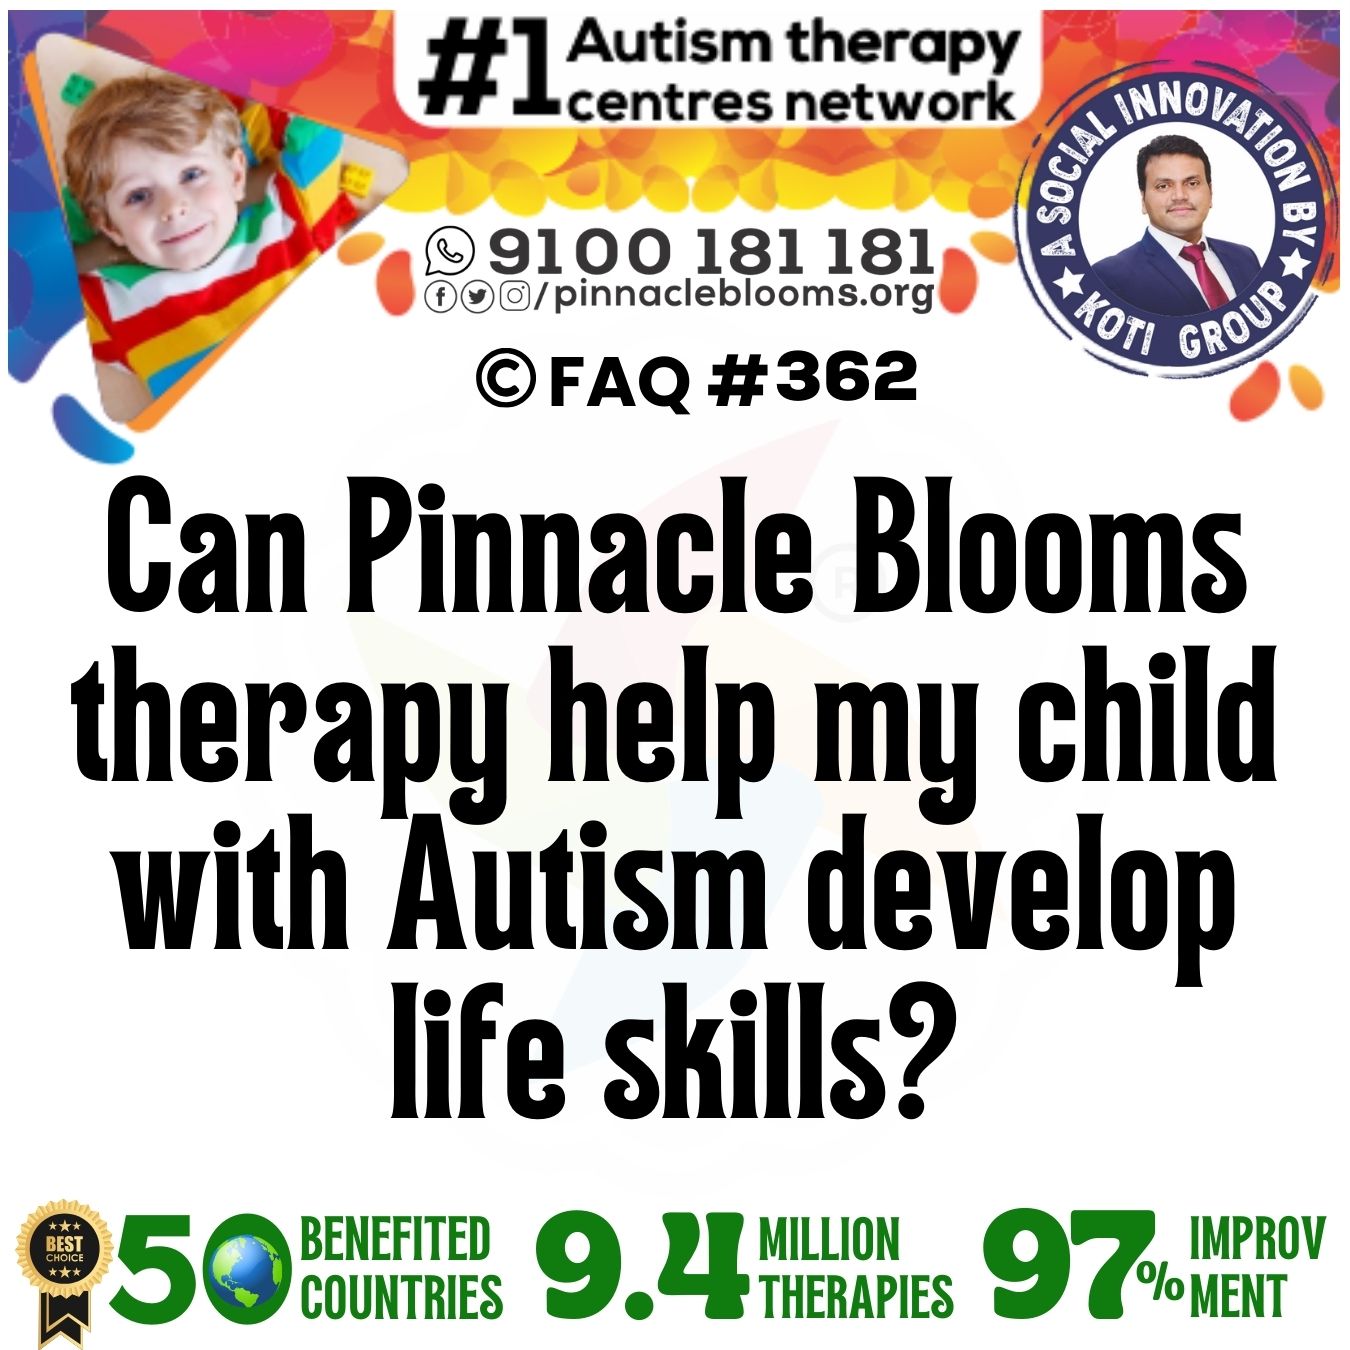 Can Pinnacle Blooms therapy help my child with Autism develop life skills?